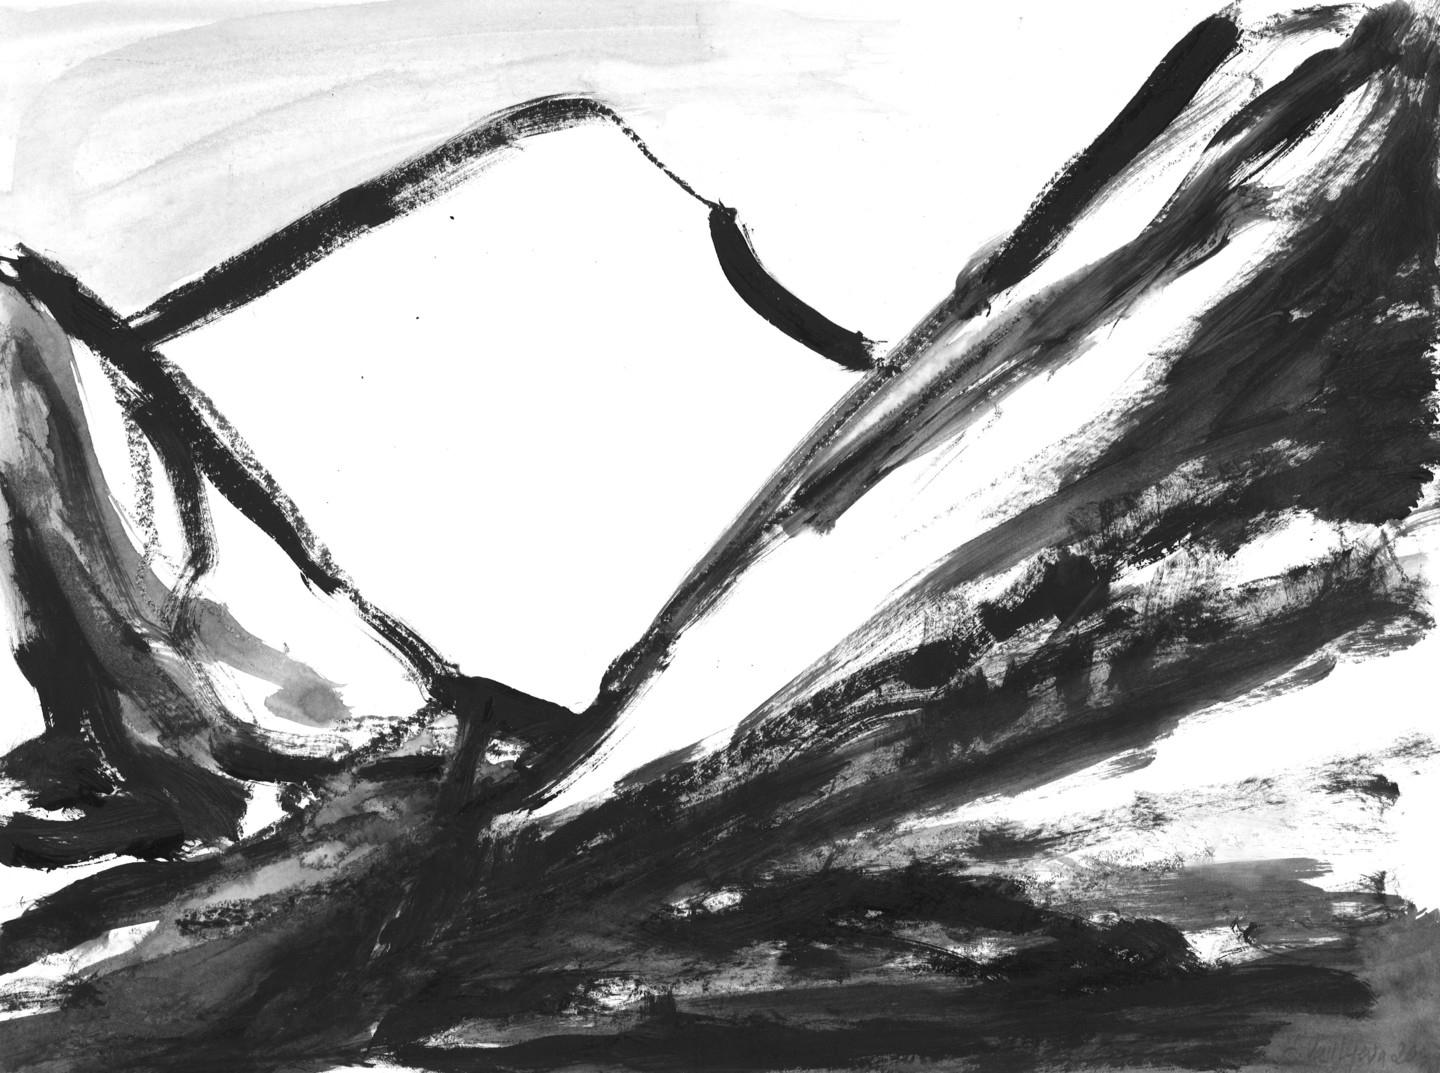 Anastasia Vasilyeva - Mountains 005 (2020)

Abstract landscape, painting in black, grey, white colors. Artwork represents Alps in winter, covered with snow and mist above it. Painting was made with mixed media, acrylic and watercolor on paper in